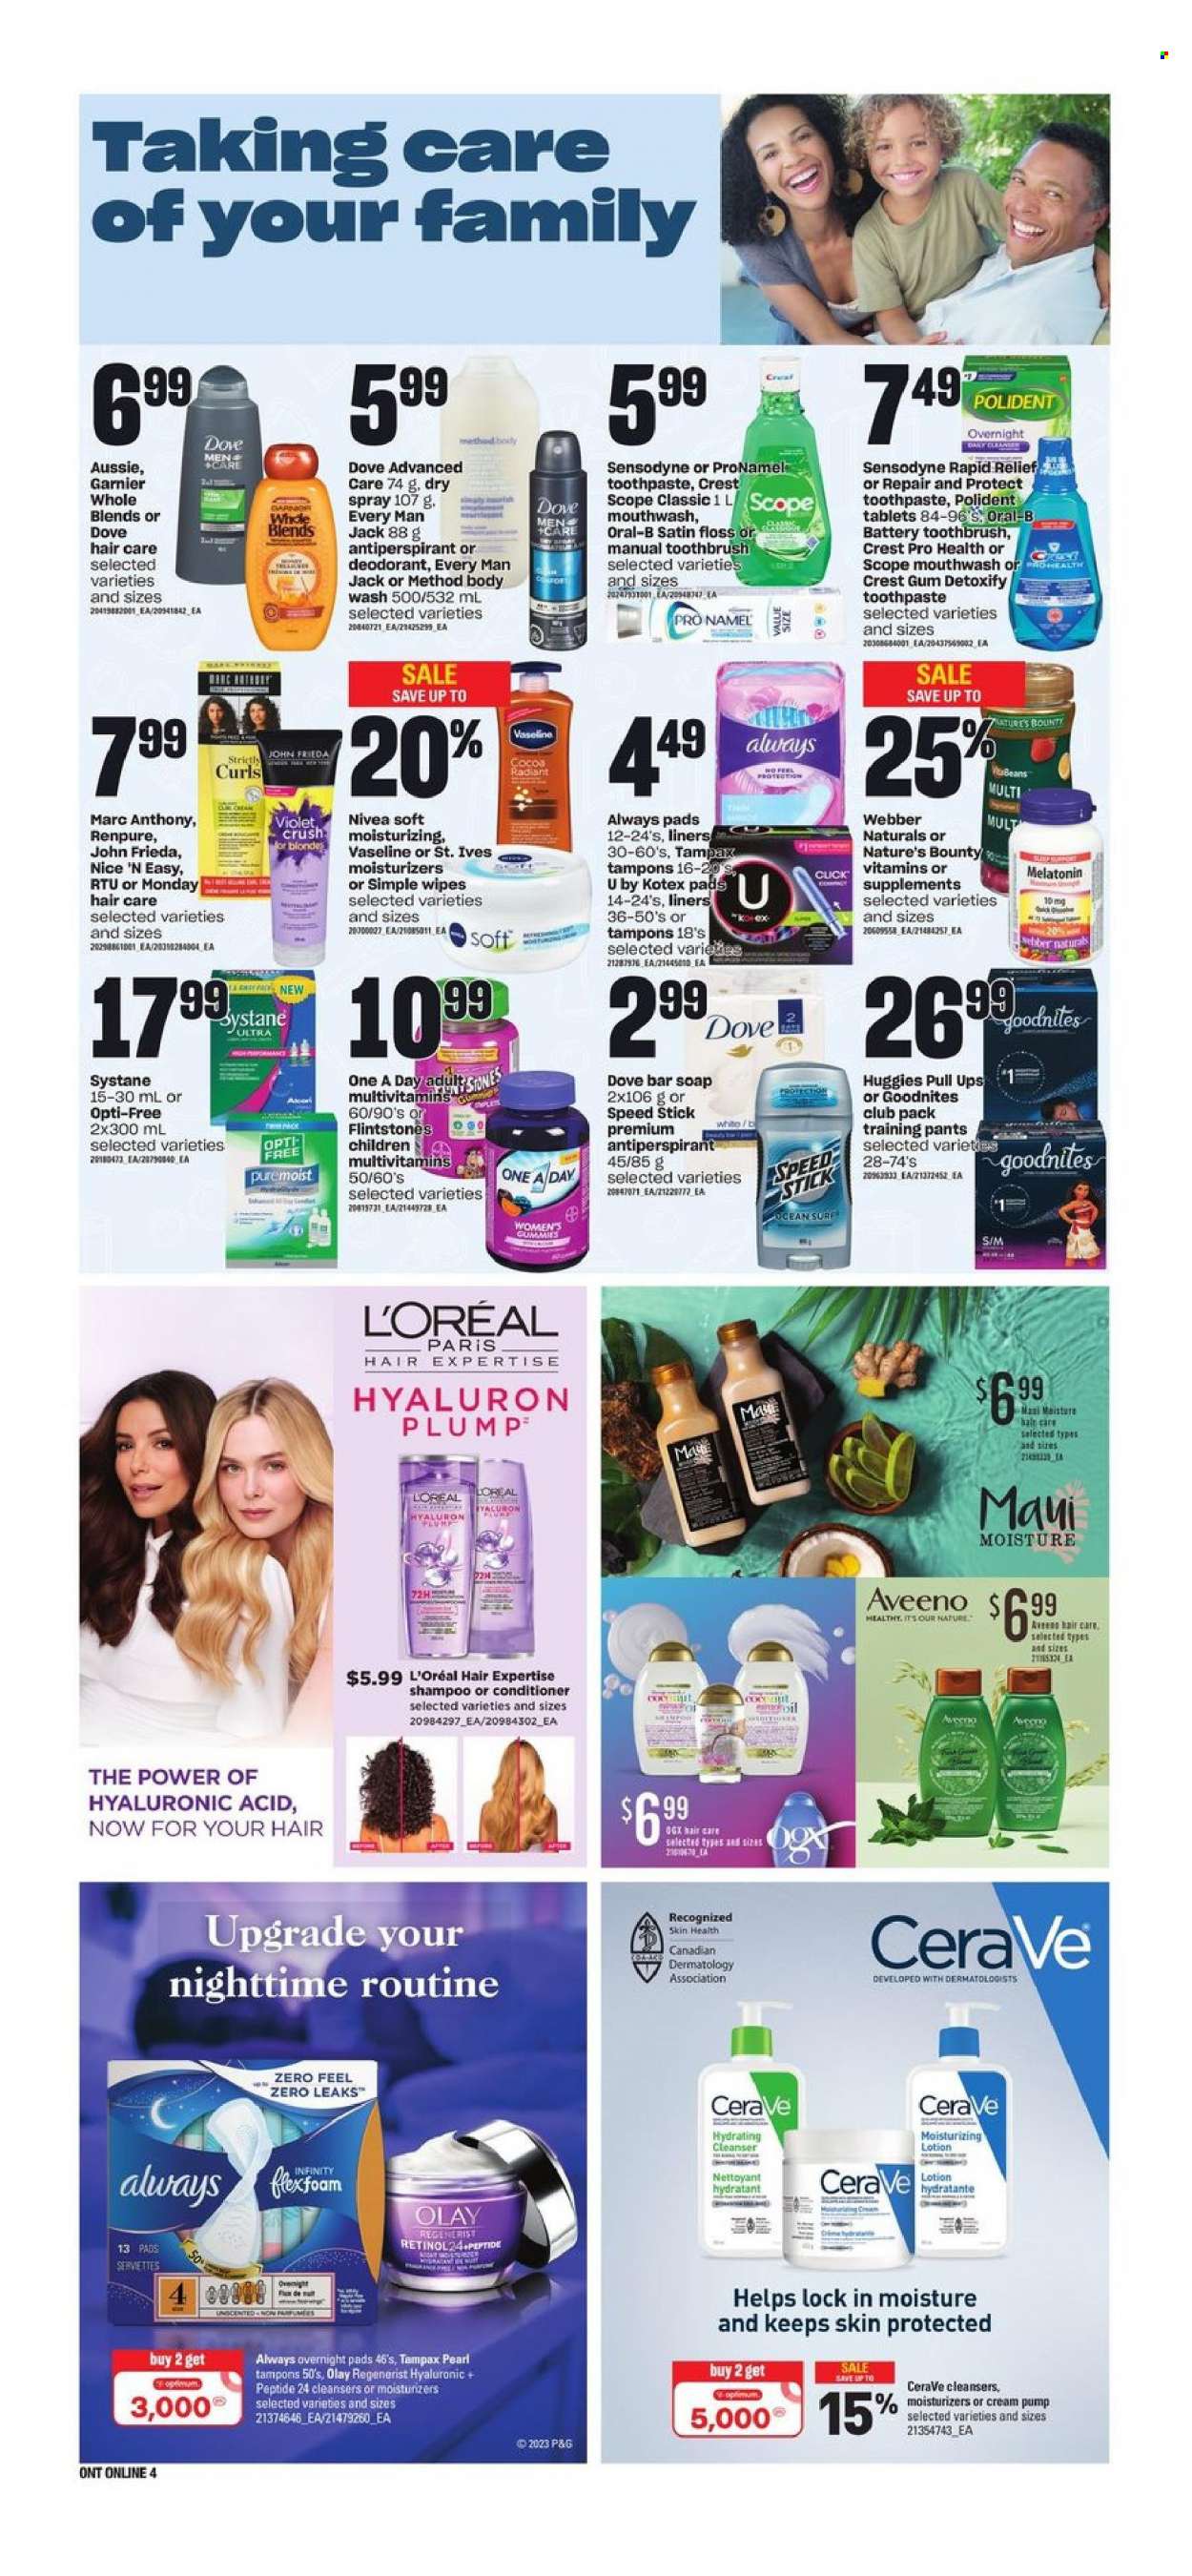 thumbnail - Independent Flyer - March 16, 2023 - March 22, 2023 - Sales products - beans, Dove, tea, wipes, pants, baby pants, Aveeno, Nivea, cleaner, Vaseline, soap bar, soap, toothbrush, toothpaste, mouthwash, Polident, Crest, Always pads, sanitary pads, tampons, CeraVe, cleanser, L’Oréal, moisturizer, Olay, Infinity, OGX, Aussie, conditioner, John Frieda, Maui Moisture, body lotion, anti-perspirant, Speed Stick, Sure, serviettes, Optimum, pump, multivitamin, Nature's Bounty, Garnier, shampoo, Systane, Tampax, Huggies, Oral-B, Sensodyne, deodorant. Page 8.